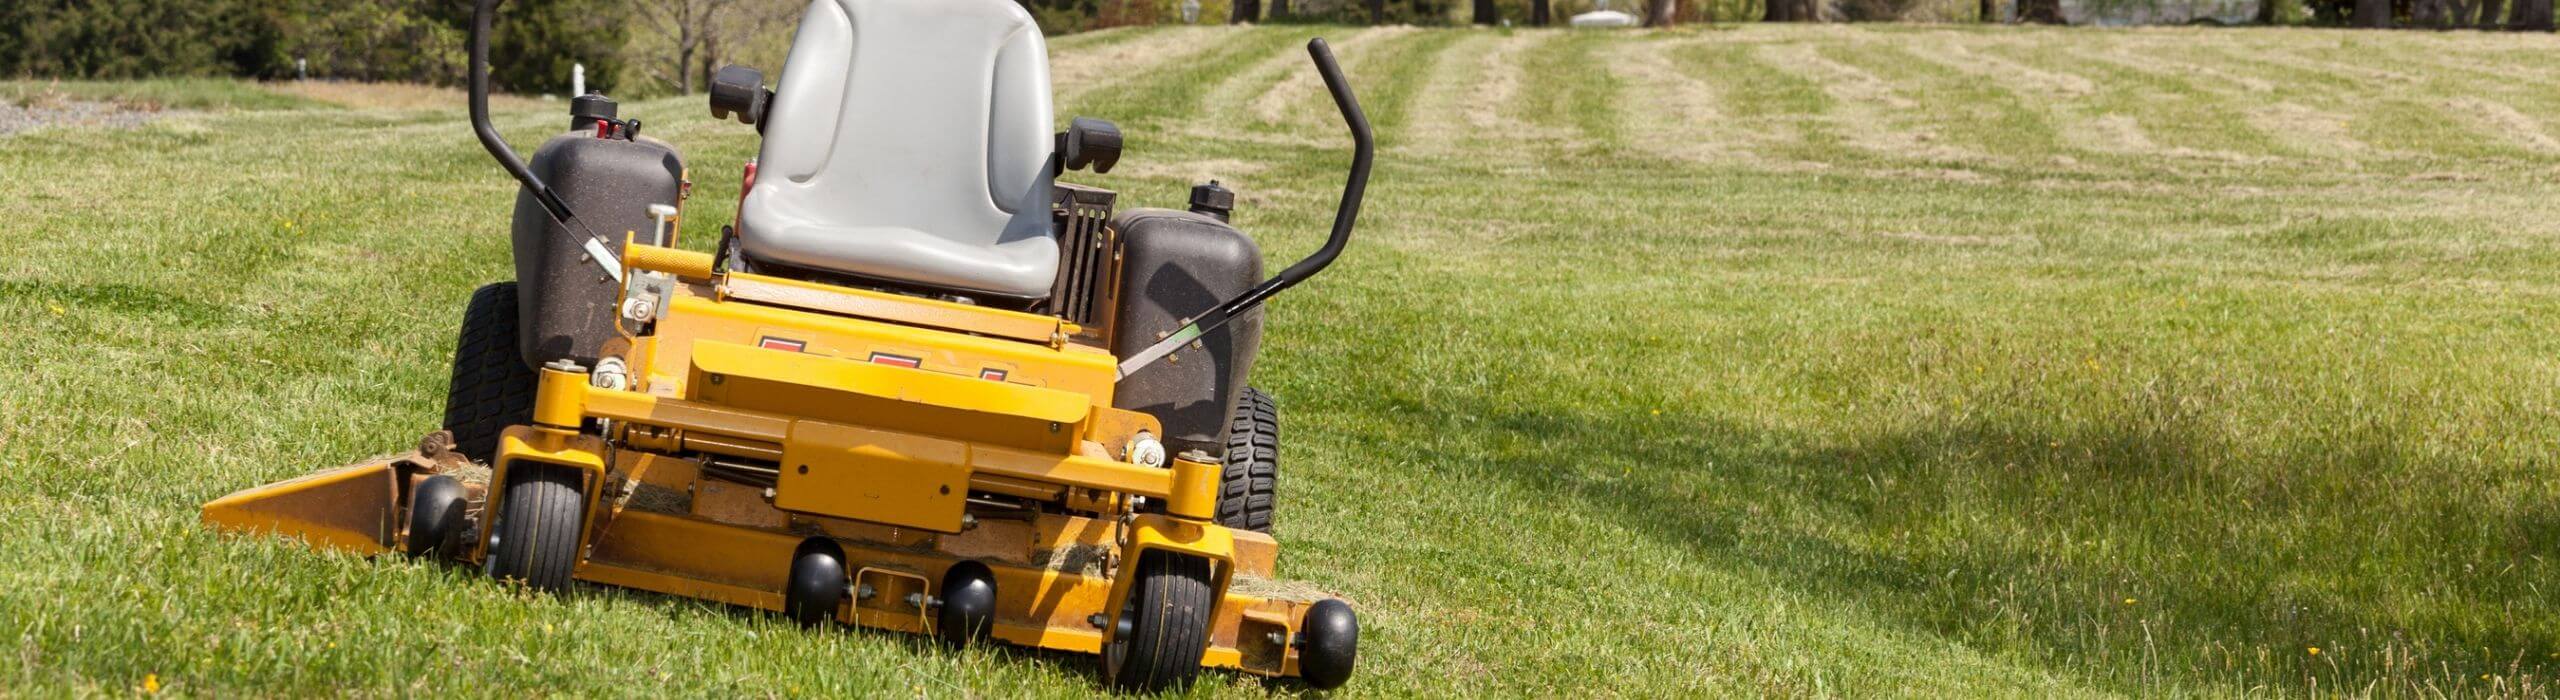 yellow lawn mower on grass